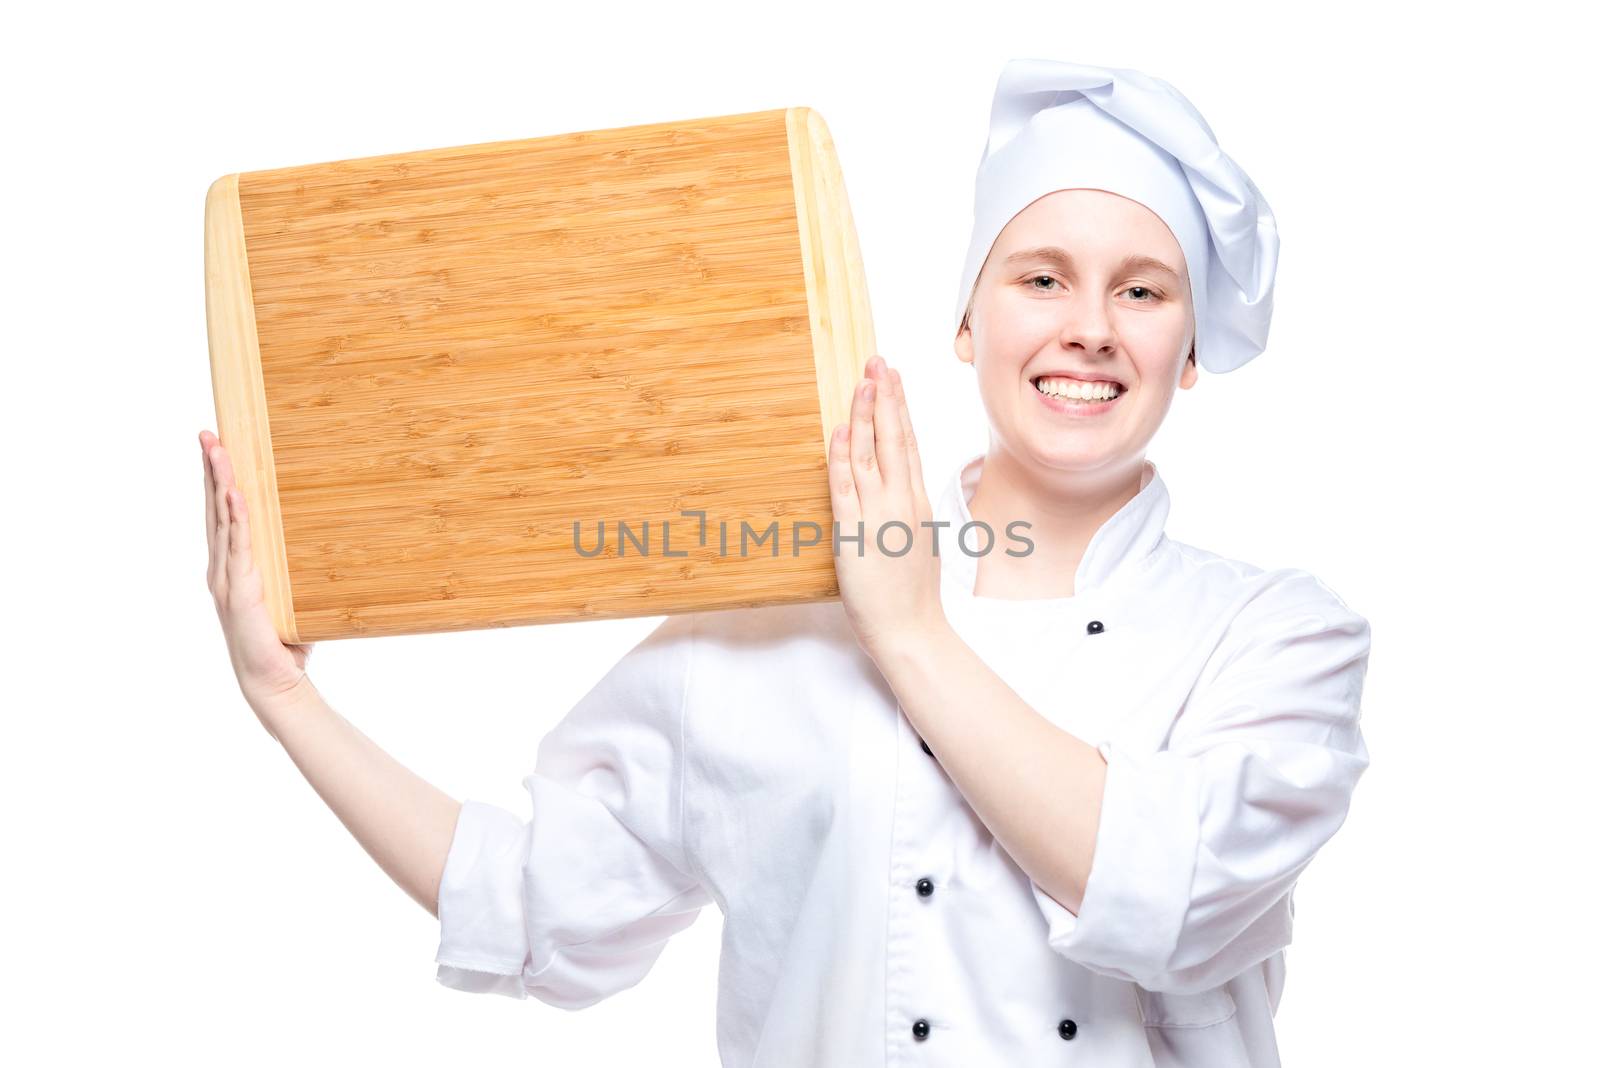 chef cook with wooden cutting board posing on a white background by kosmsos111